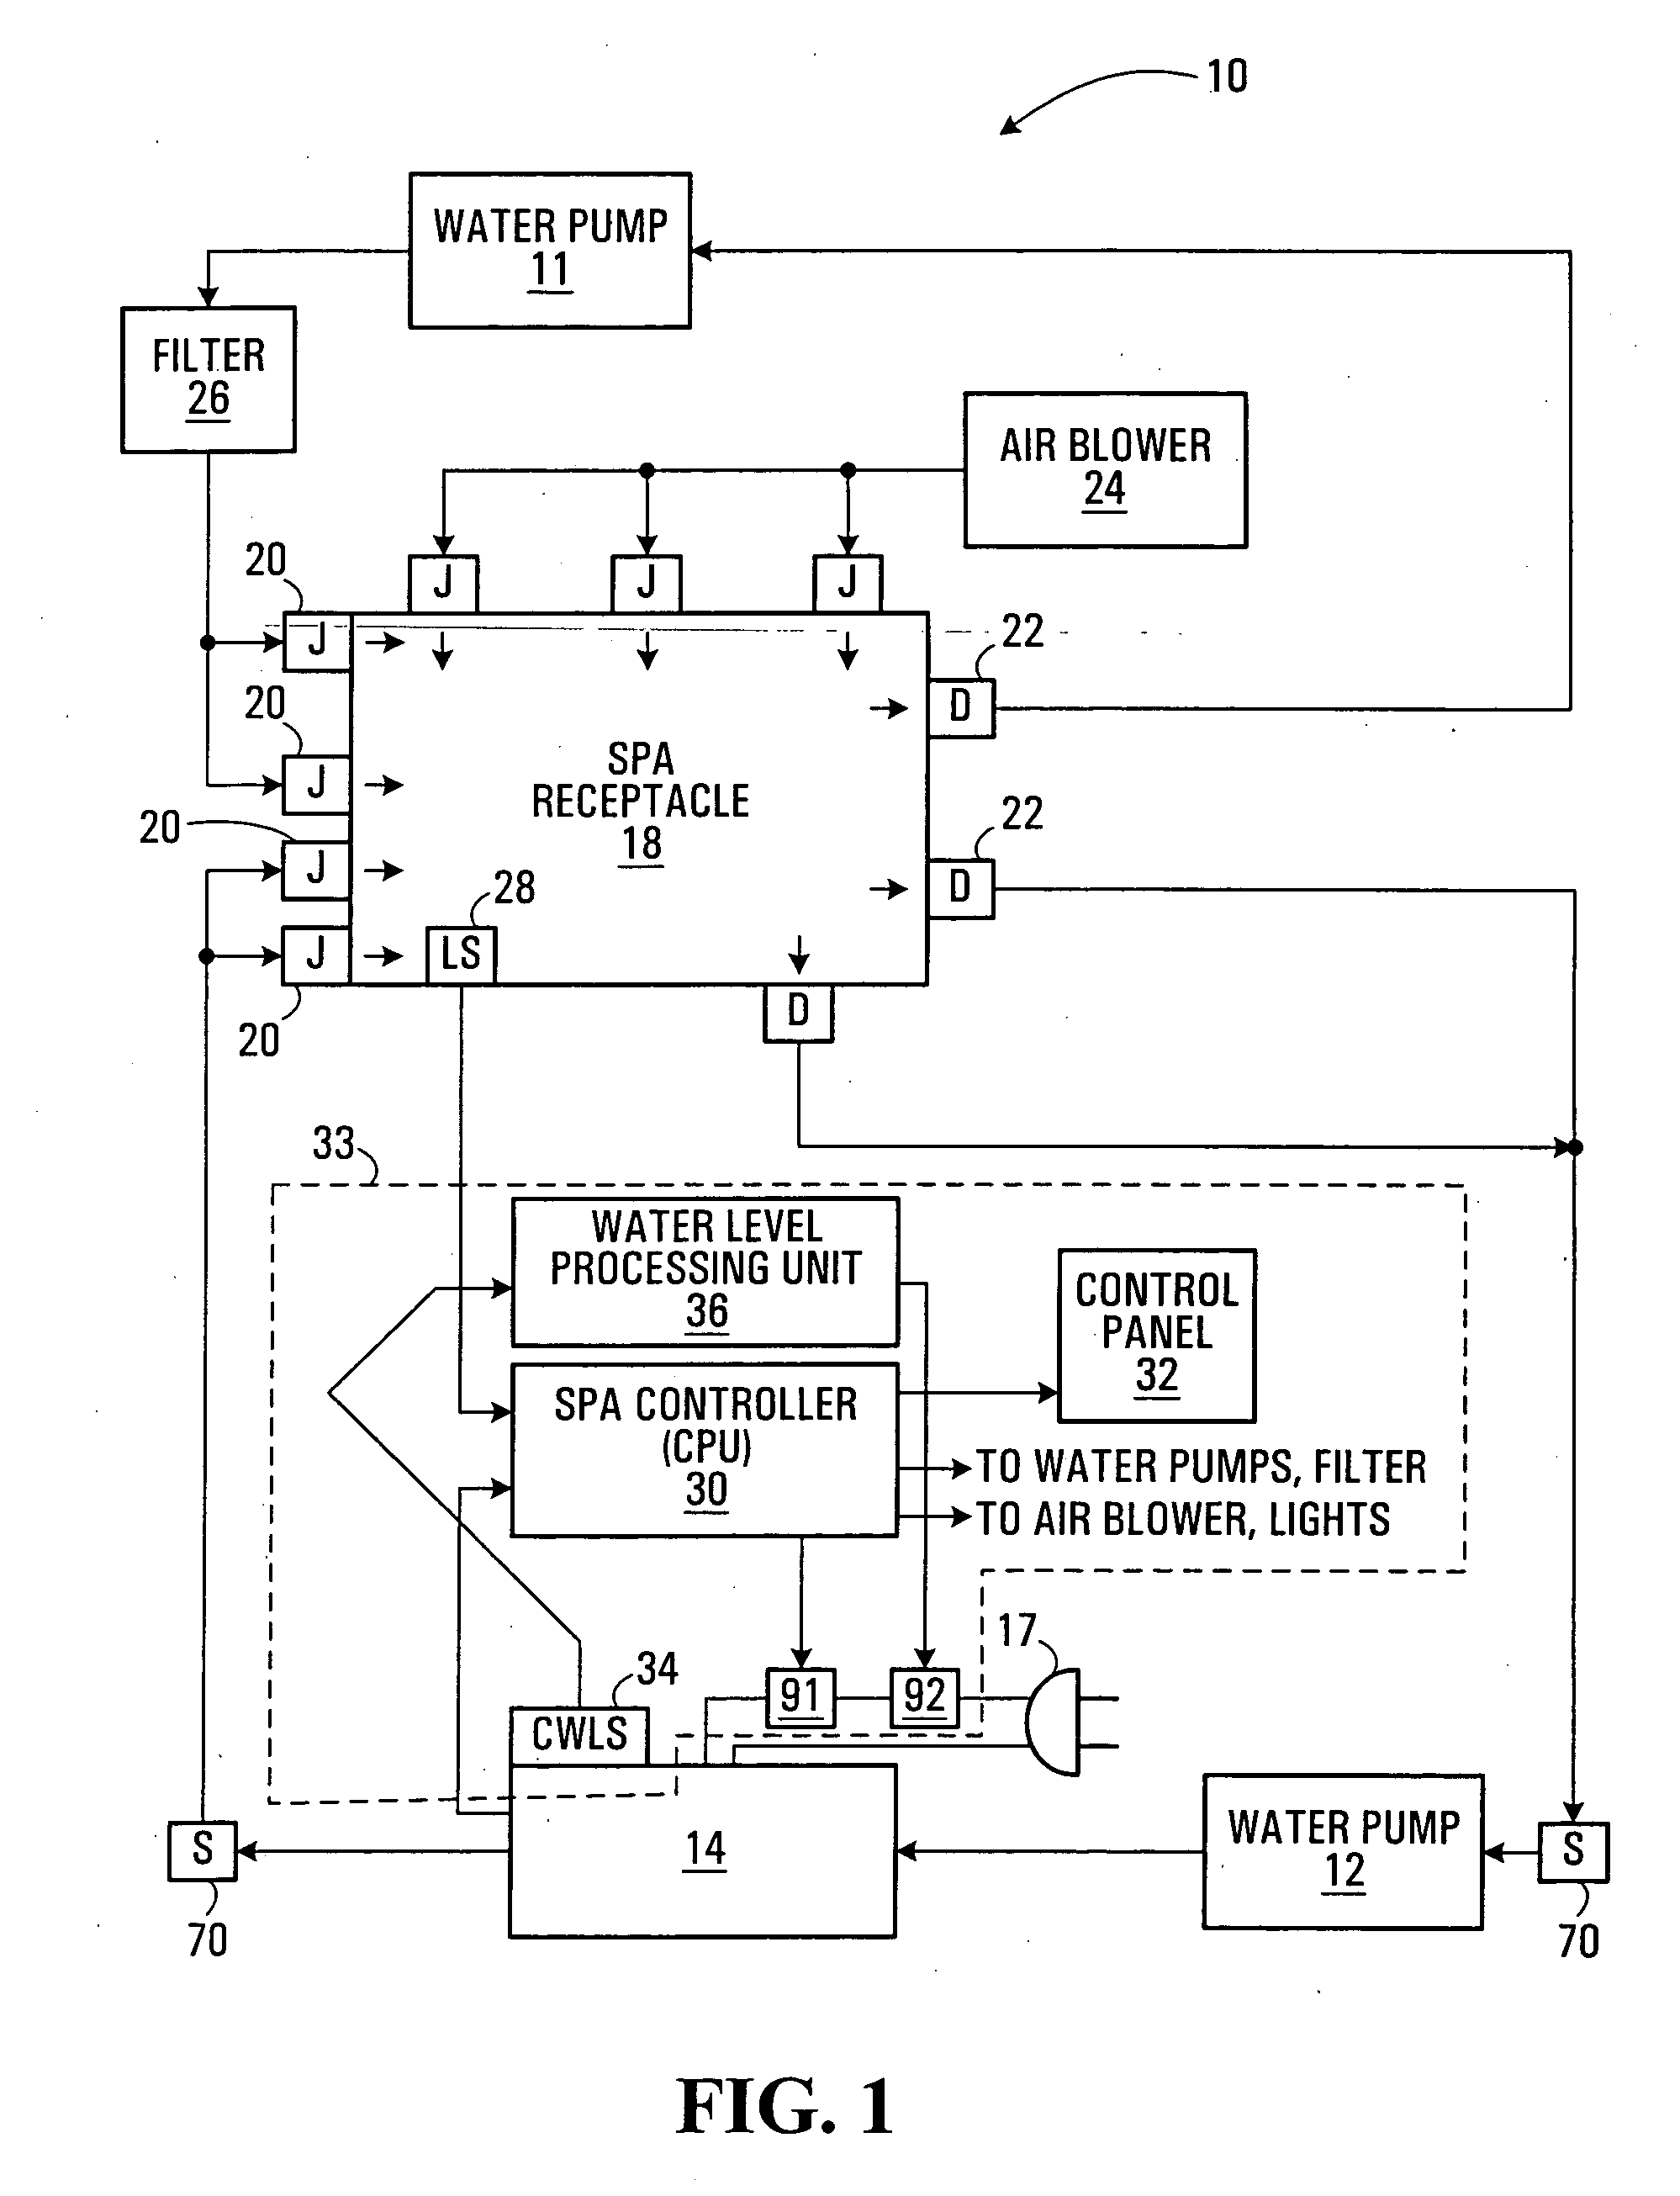 Bathing unit control system with capacitive water level sensor